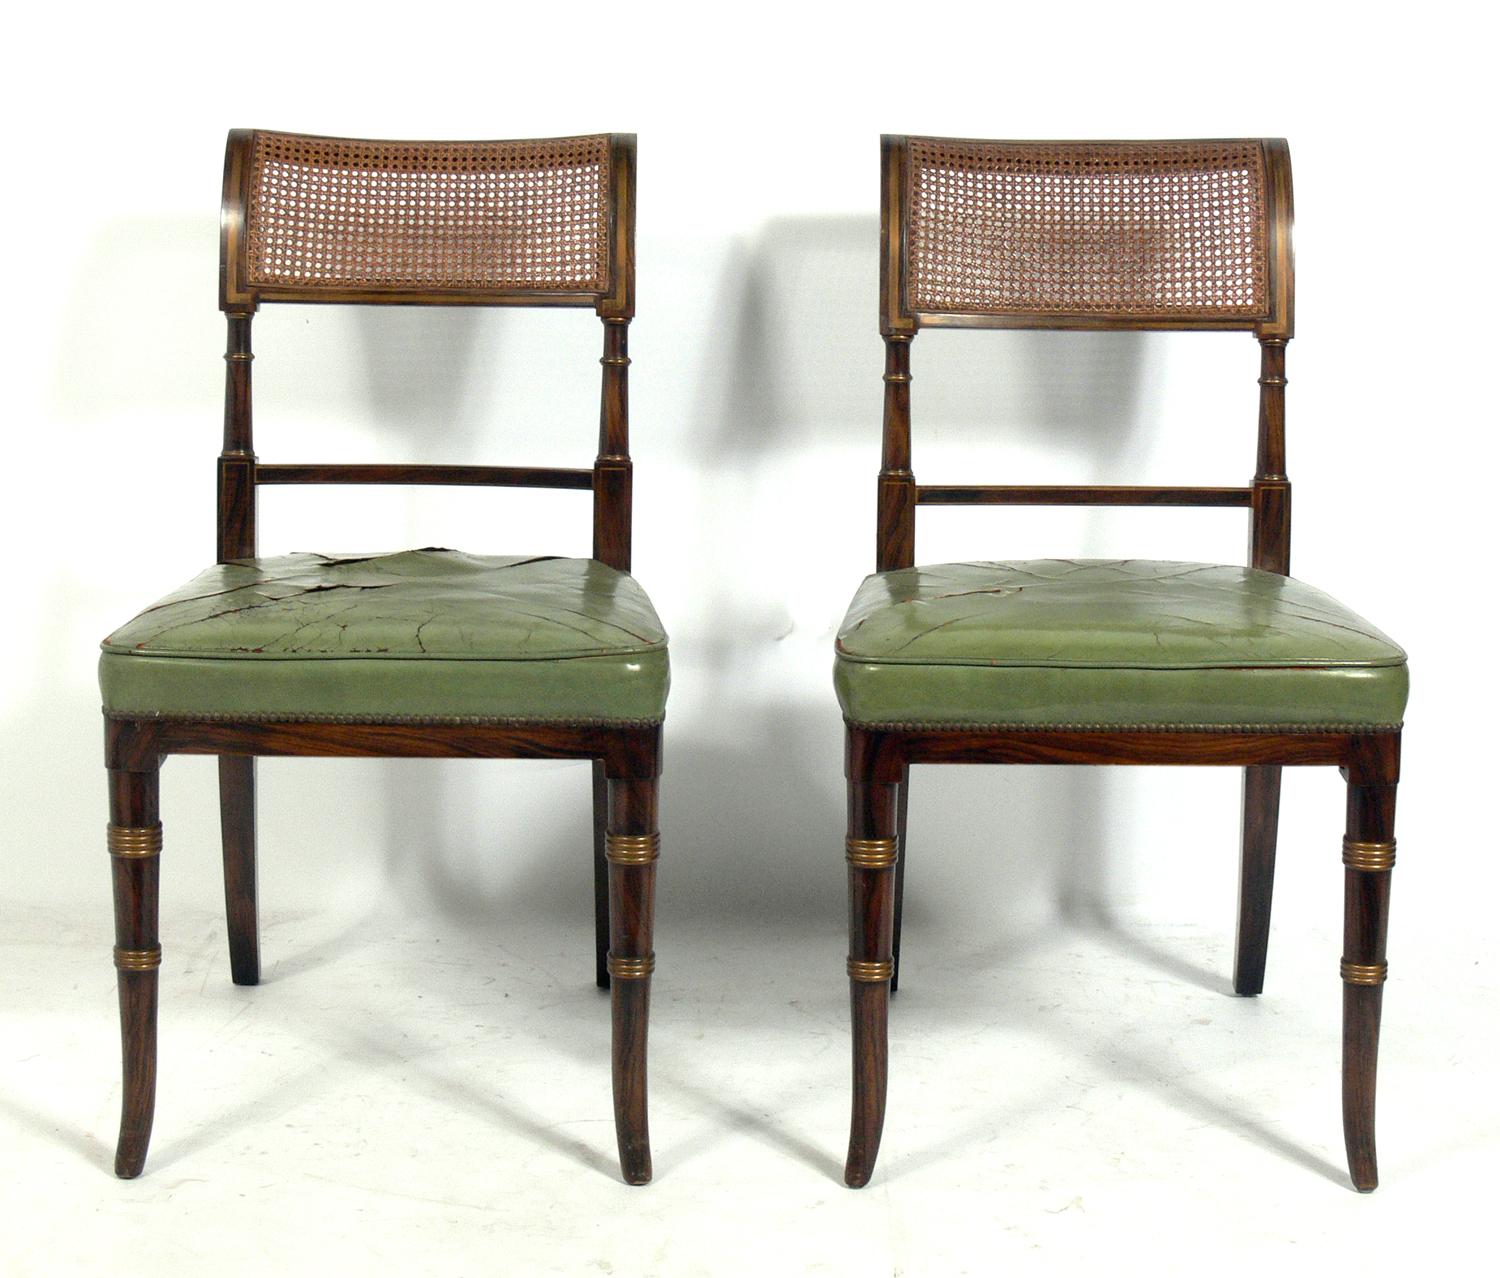 Set of four Regency faux rosewood dining chairs, American, circa 1940s, possibly earlier. They are currently being reupholstered and can be completed in your fabric. The price noted includes reupholstery in your fabric.